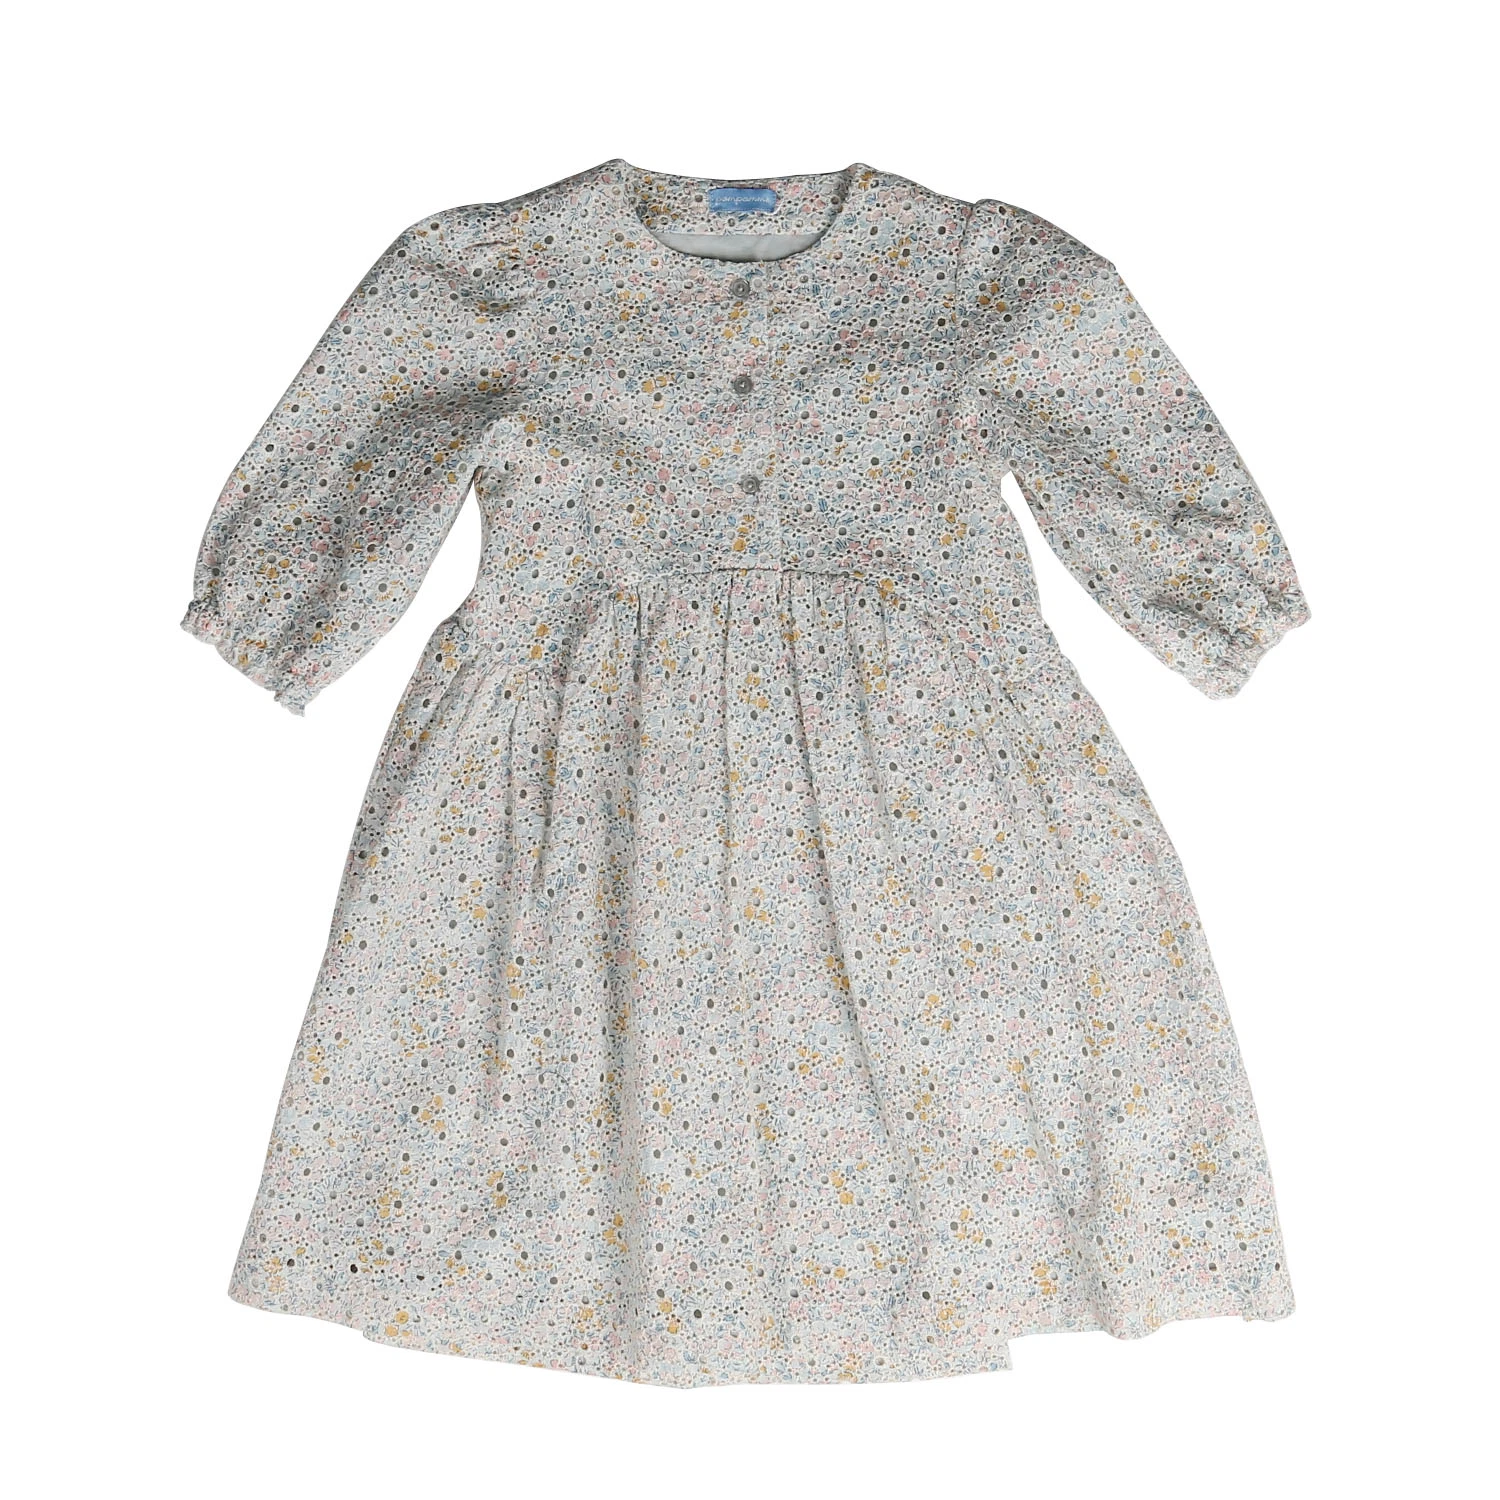 Children Kids Fashion Clothing Girl Woven Dress with Embroidery Fabric